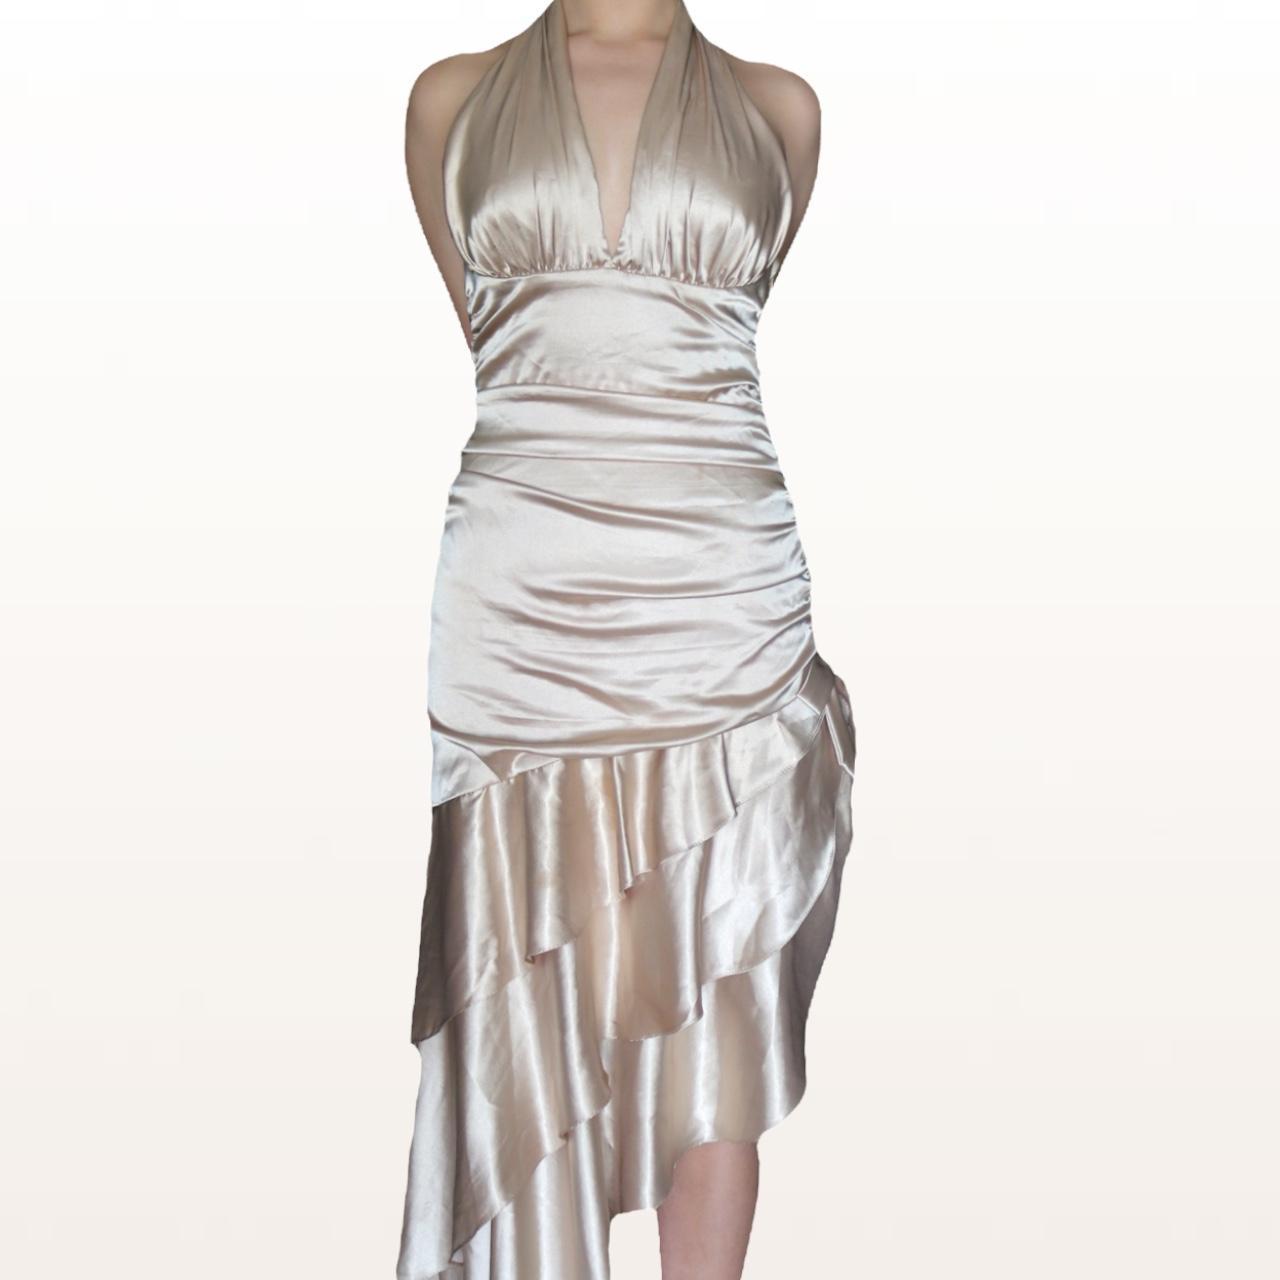 Product Image 2 - 90s champagne evening gown 🥂
-